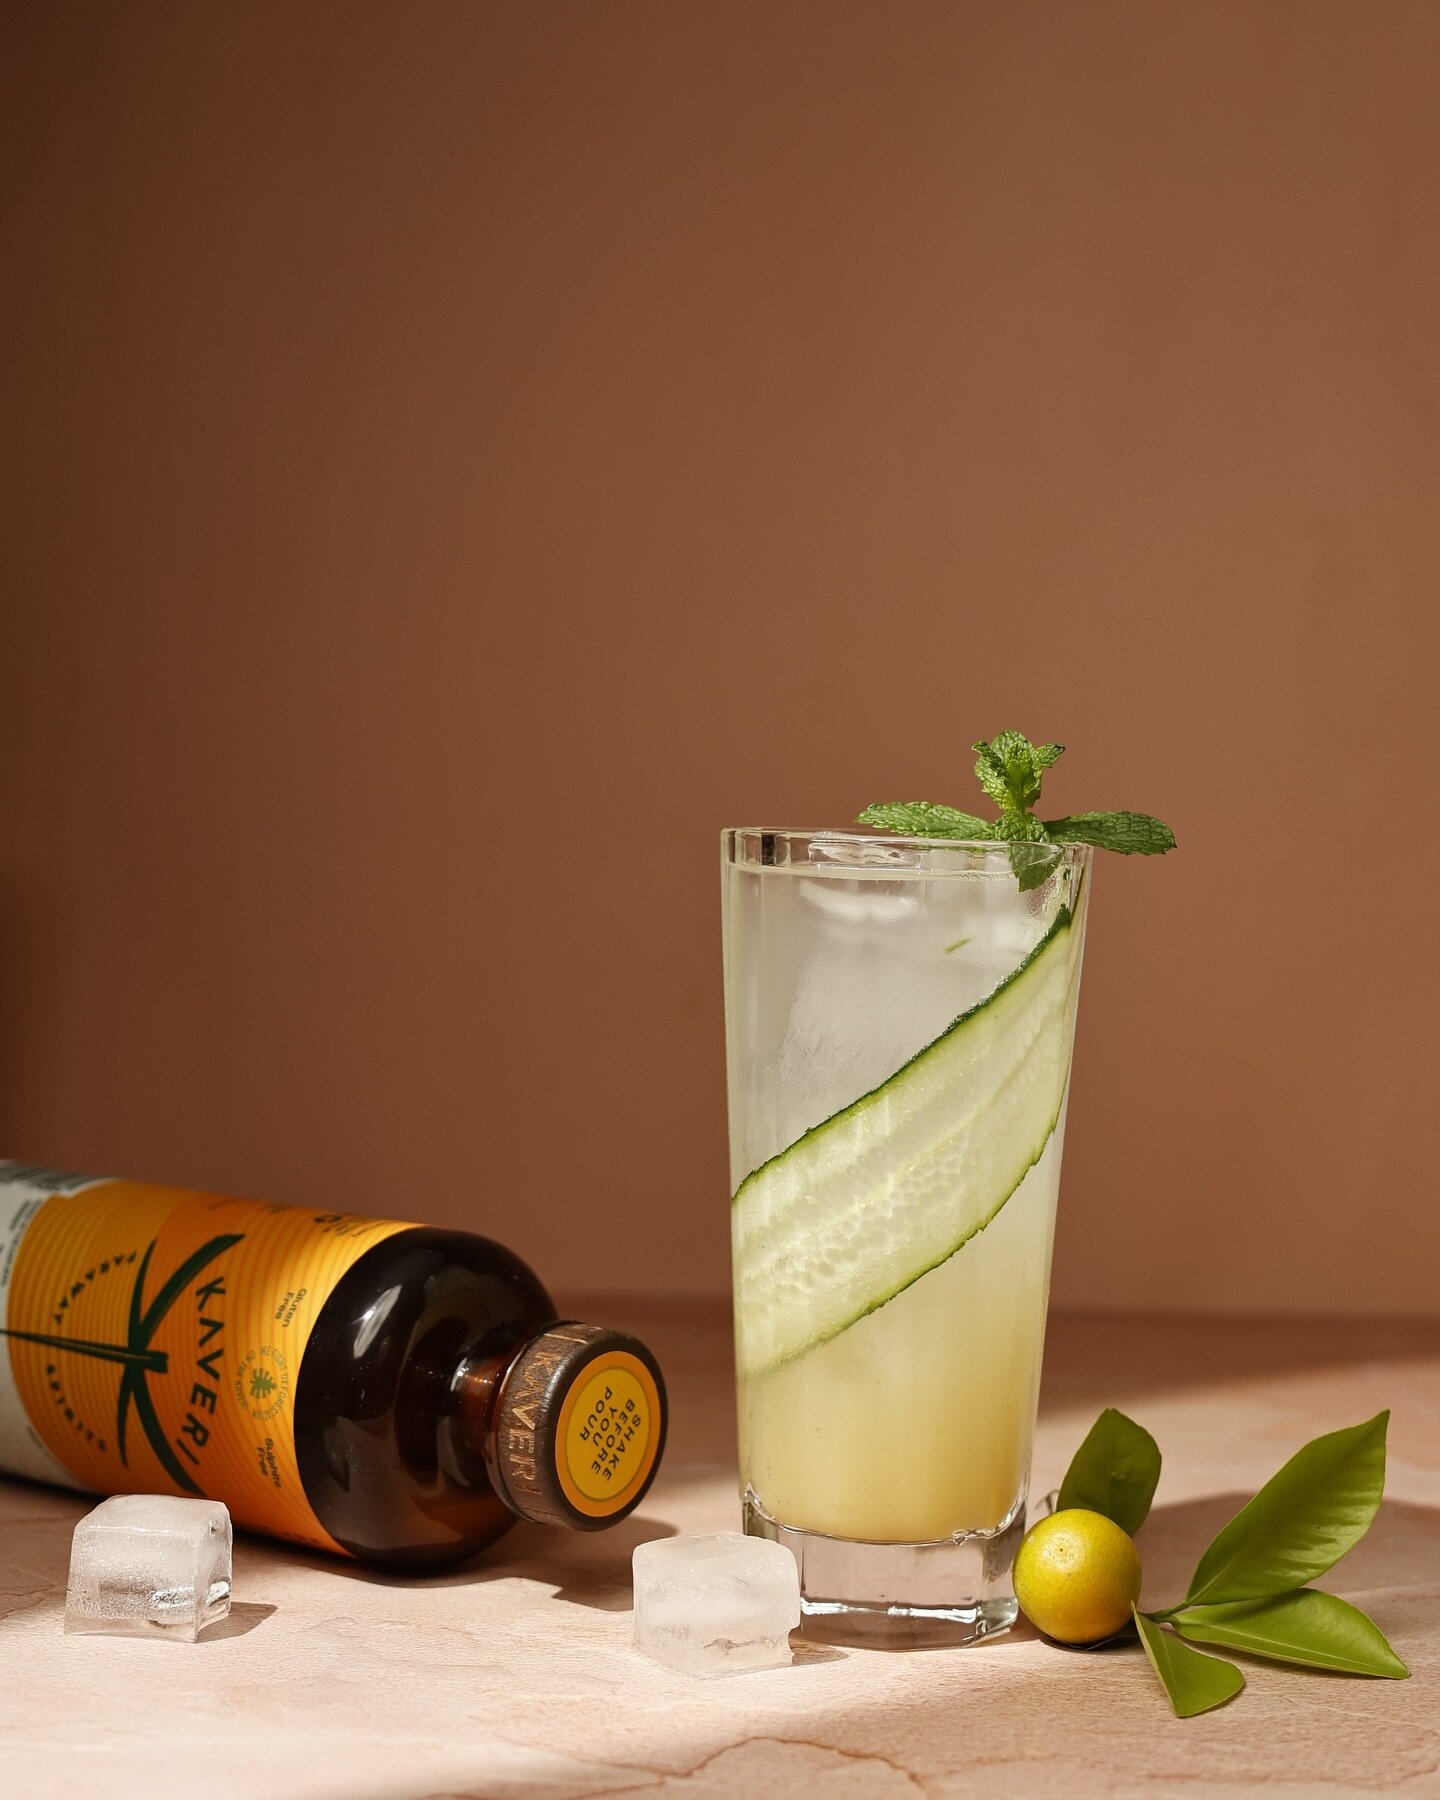 The Mule - refreshing, long, with a fiery Kaveri kick. 

RECIPE:
25ml Vodka 
25ml Kaveri 
10ml Fresh Lime Juice
Top with Premium Ginger Beer 
2 dashes Angostura Bitters (optional) 

Build the Vodka and Kaveri into a highball glass with cubed ice, top